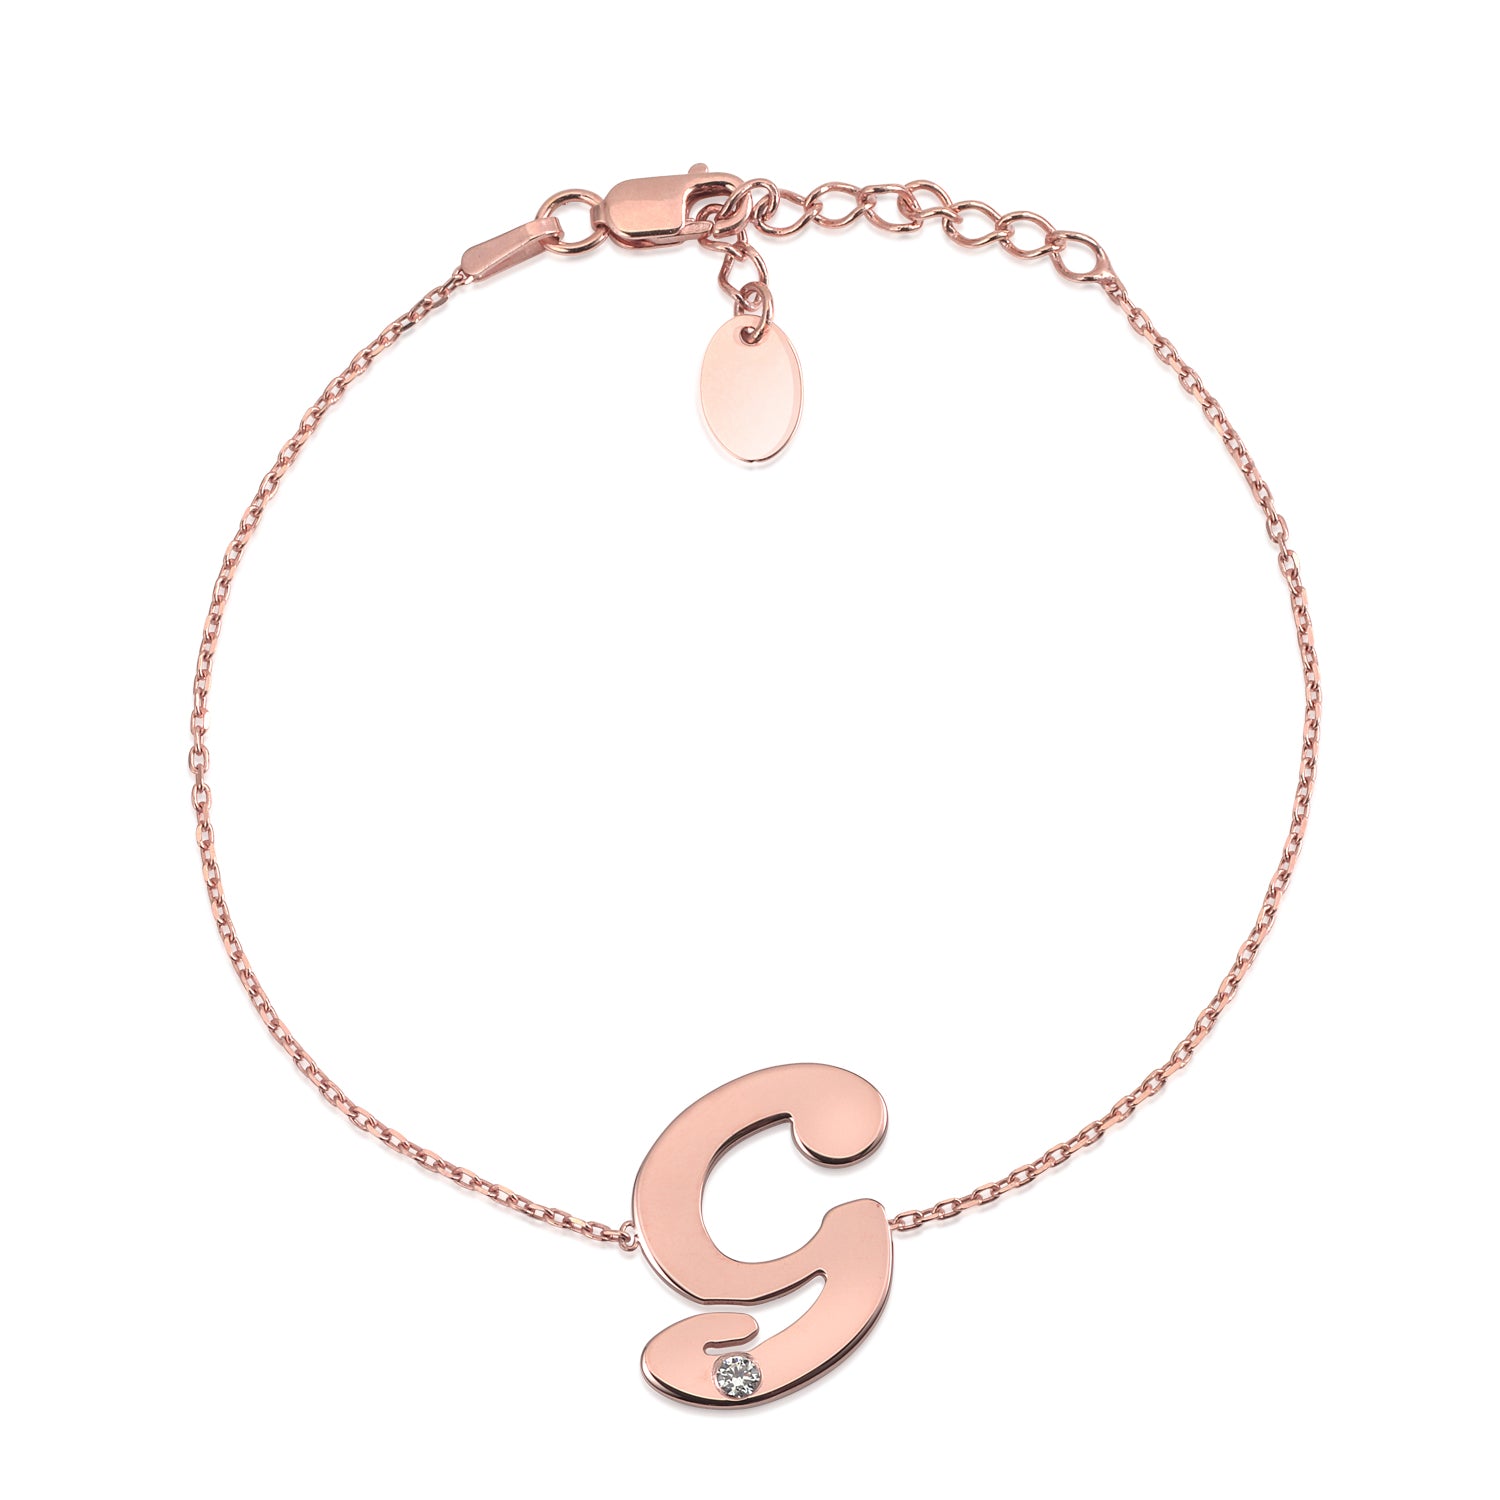 18k Gold-Plated Silver Girls ID Bracelet with Heart